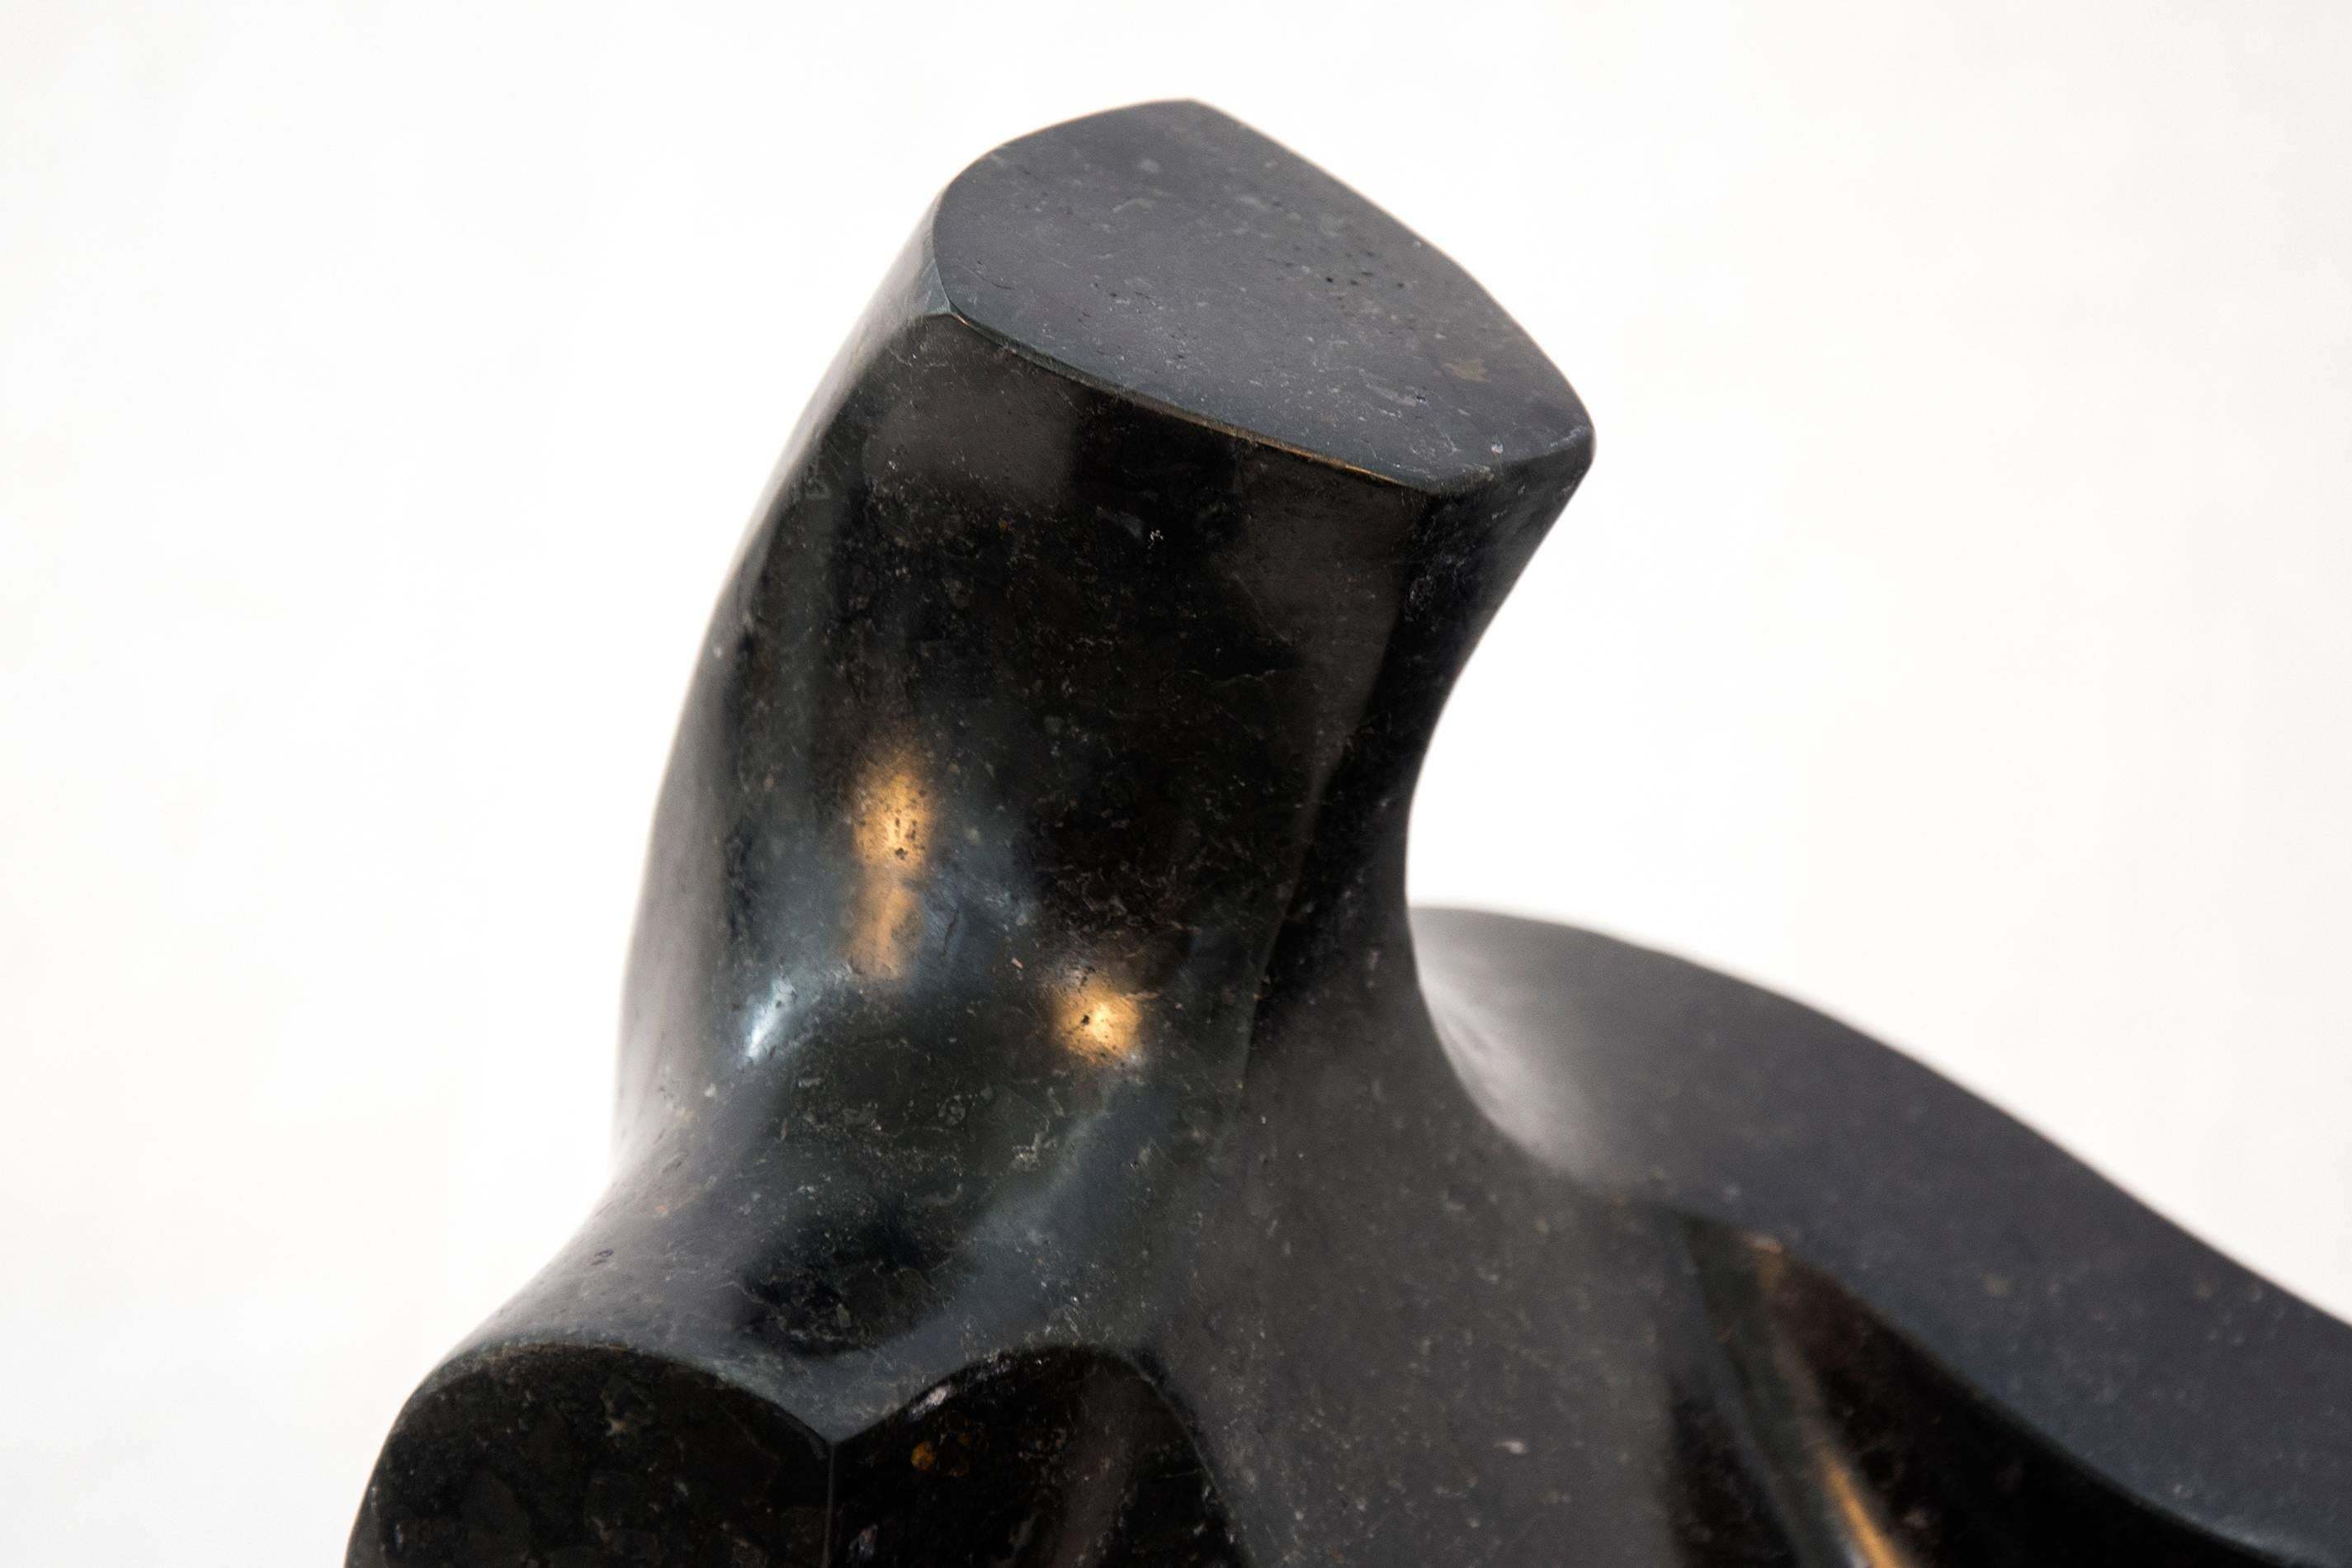 Smooth surfaced, black granite has been engineered into an elegant, modern depiction of a reclining figure. The play of space and shape changes as the viewer and light move around this classic figurative subject. This work is number 8 in a series of